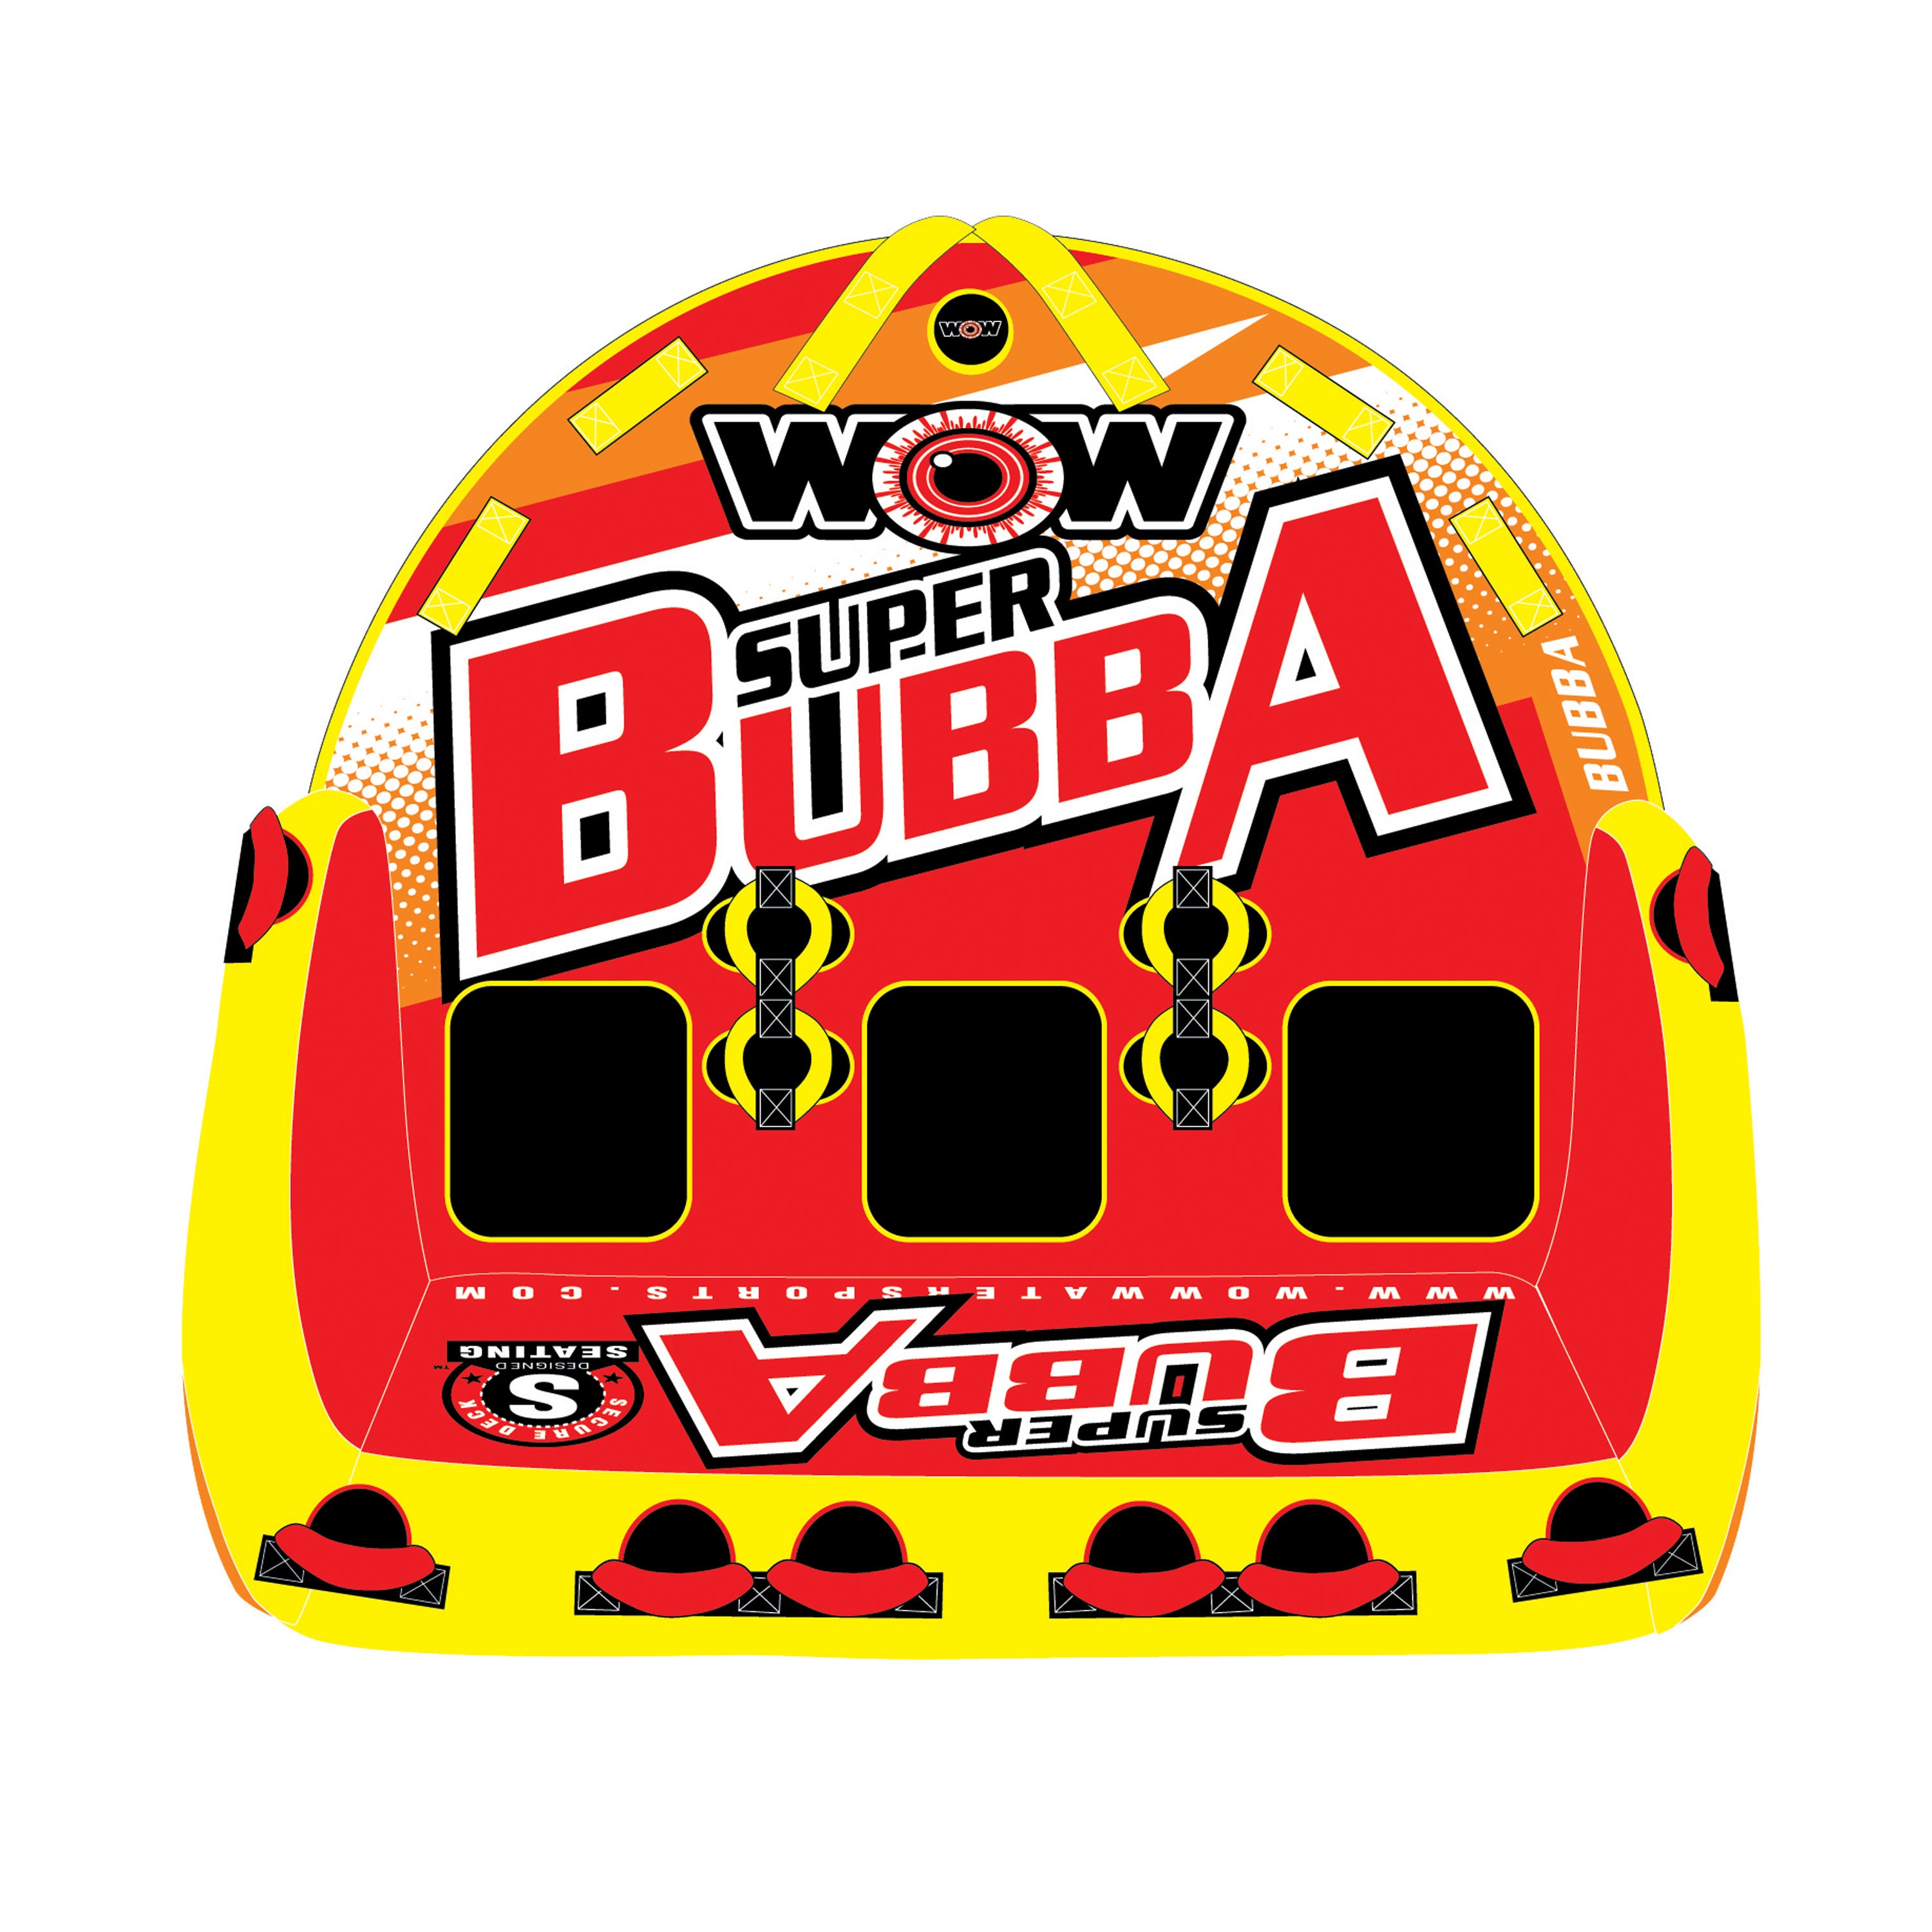 WOW Watersports 17-1060 Bubba Series Towables - Super Bubba, 3 Rider